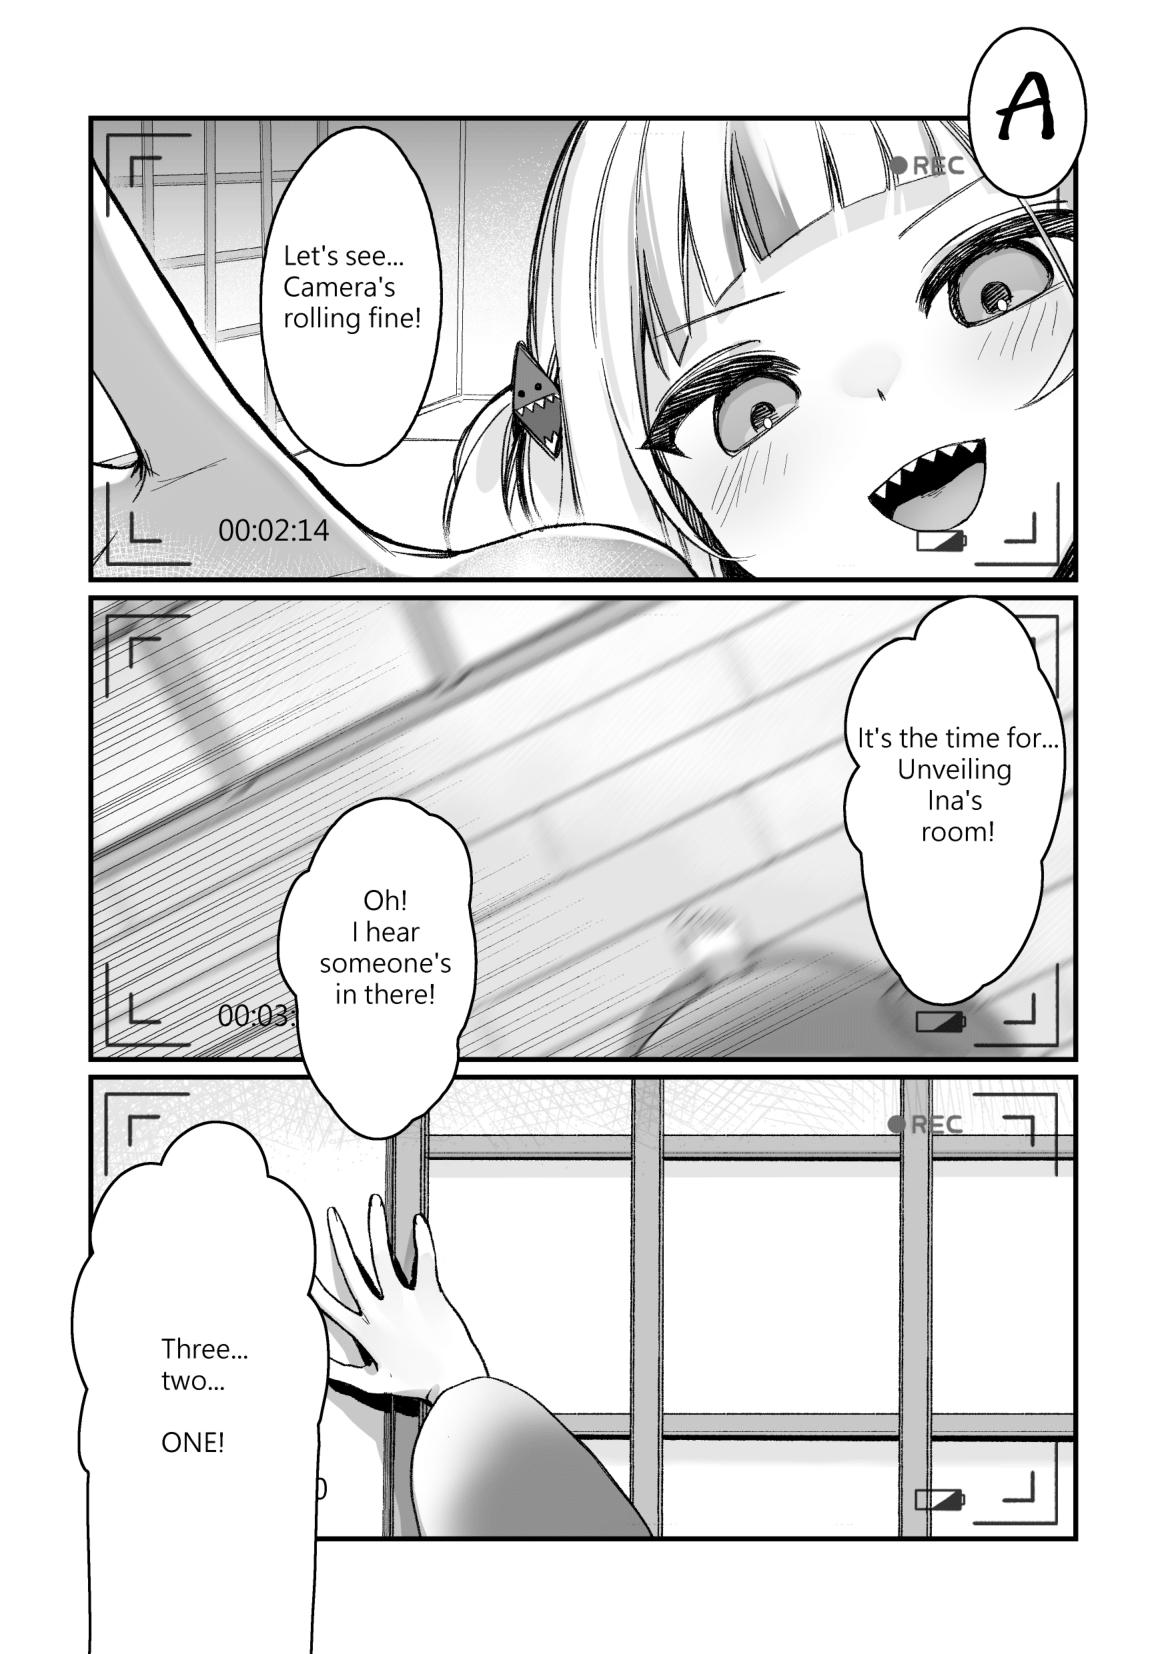 Class Room 【R-18 Comic】Tentacle!! Ina's Boing Boing is out of control!! - Hololive Speculum - Picture 3